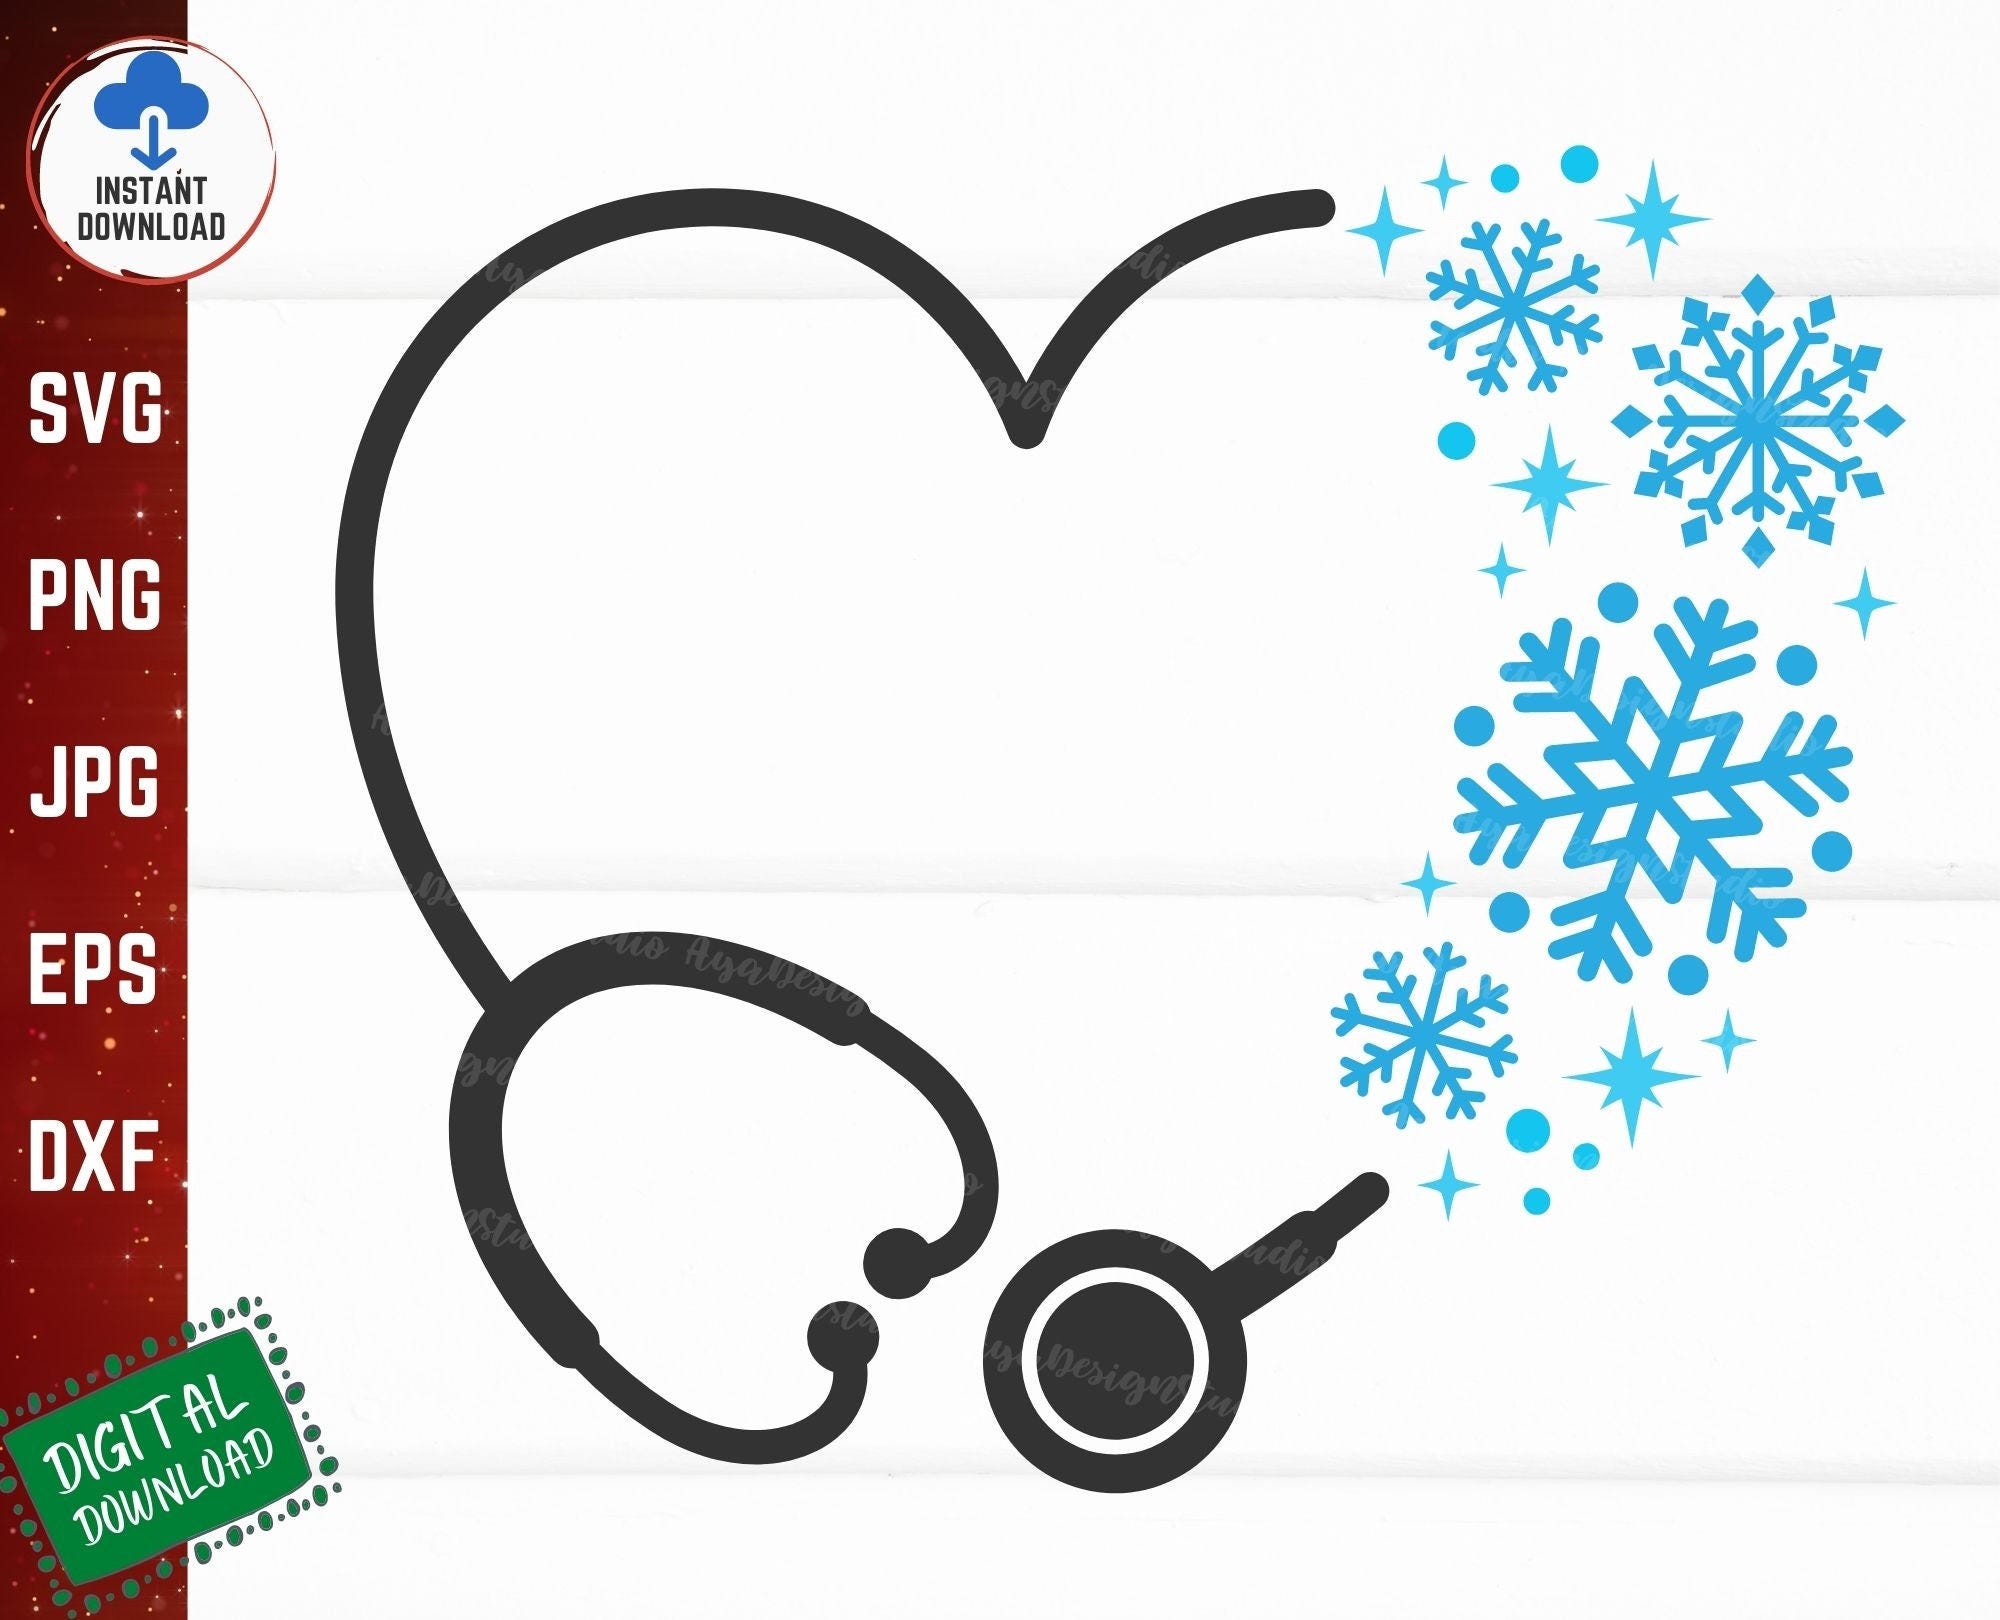 Stethoscope Heart with Snowflakes Svg, Snowflakes Stethoscope Svg, Stethoscope Monogram Frame Svg, Christmas Stethoscope Svg